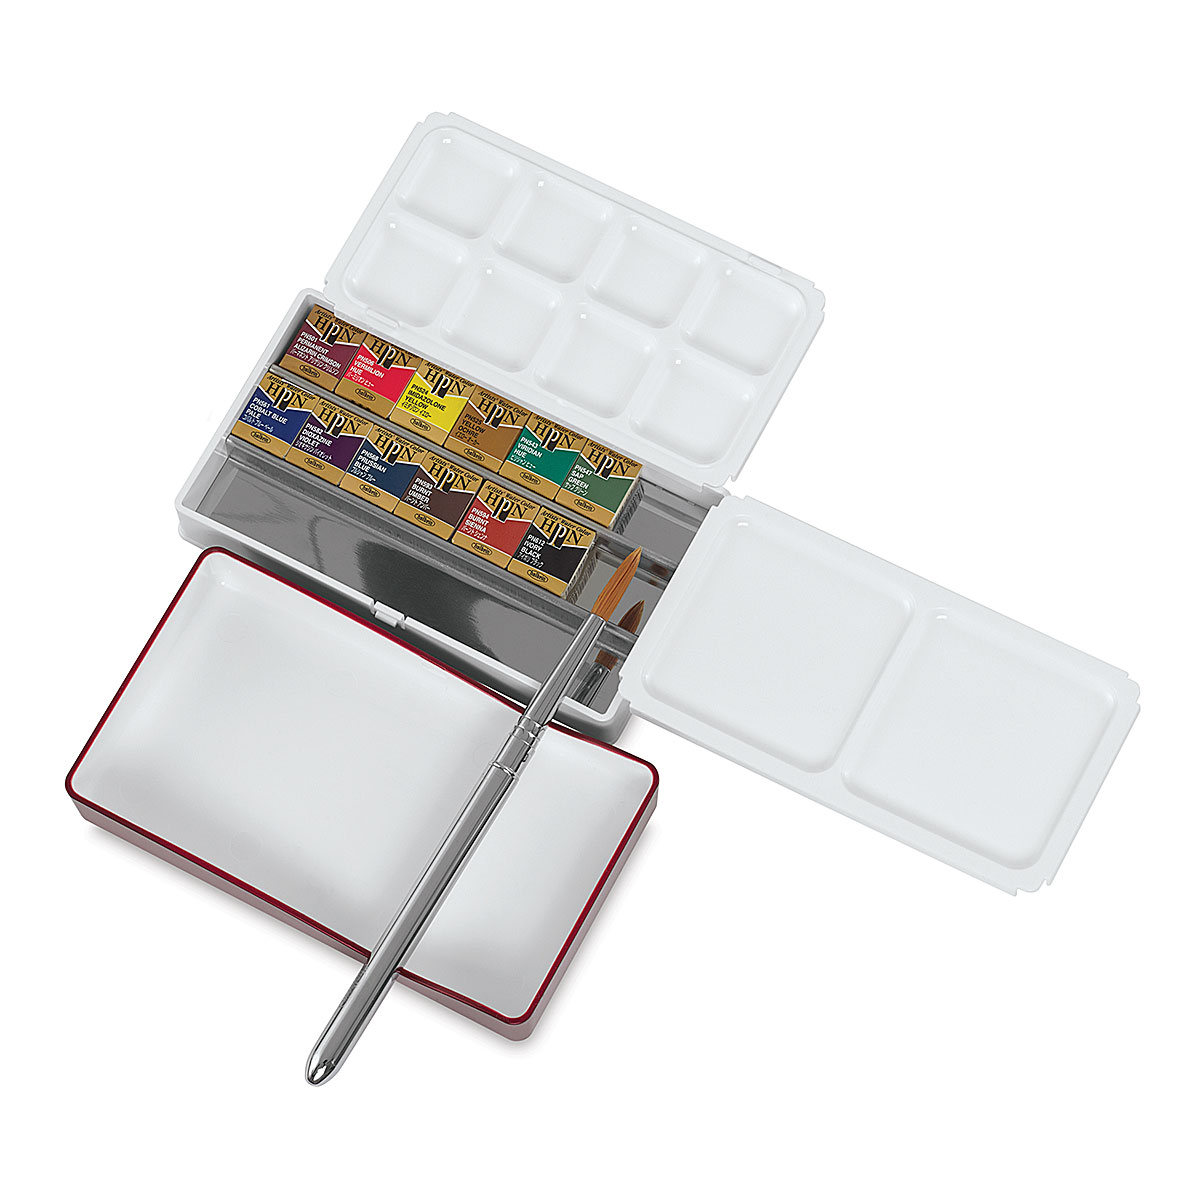 Holbein ABS Resin Watercolor Palette with Removable Well